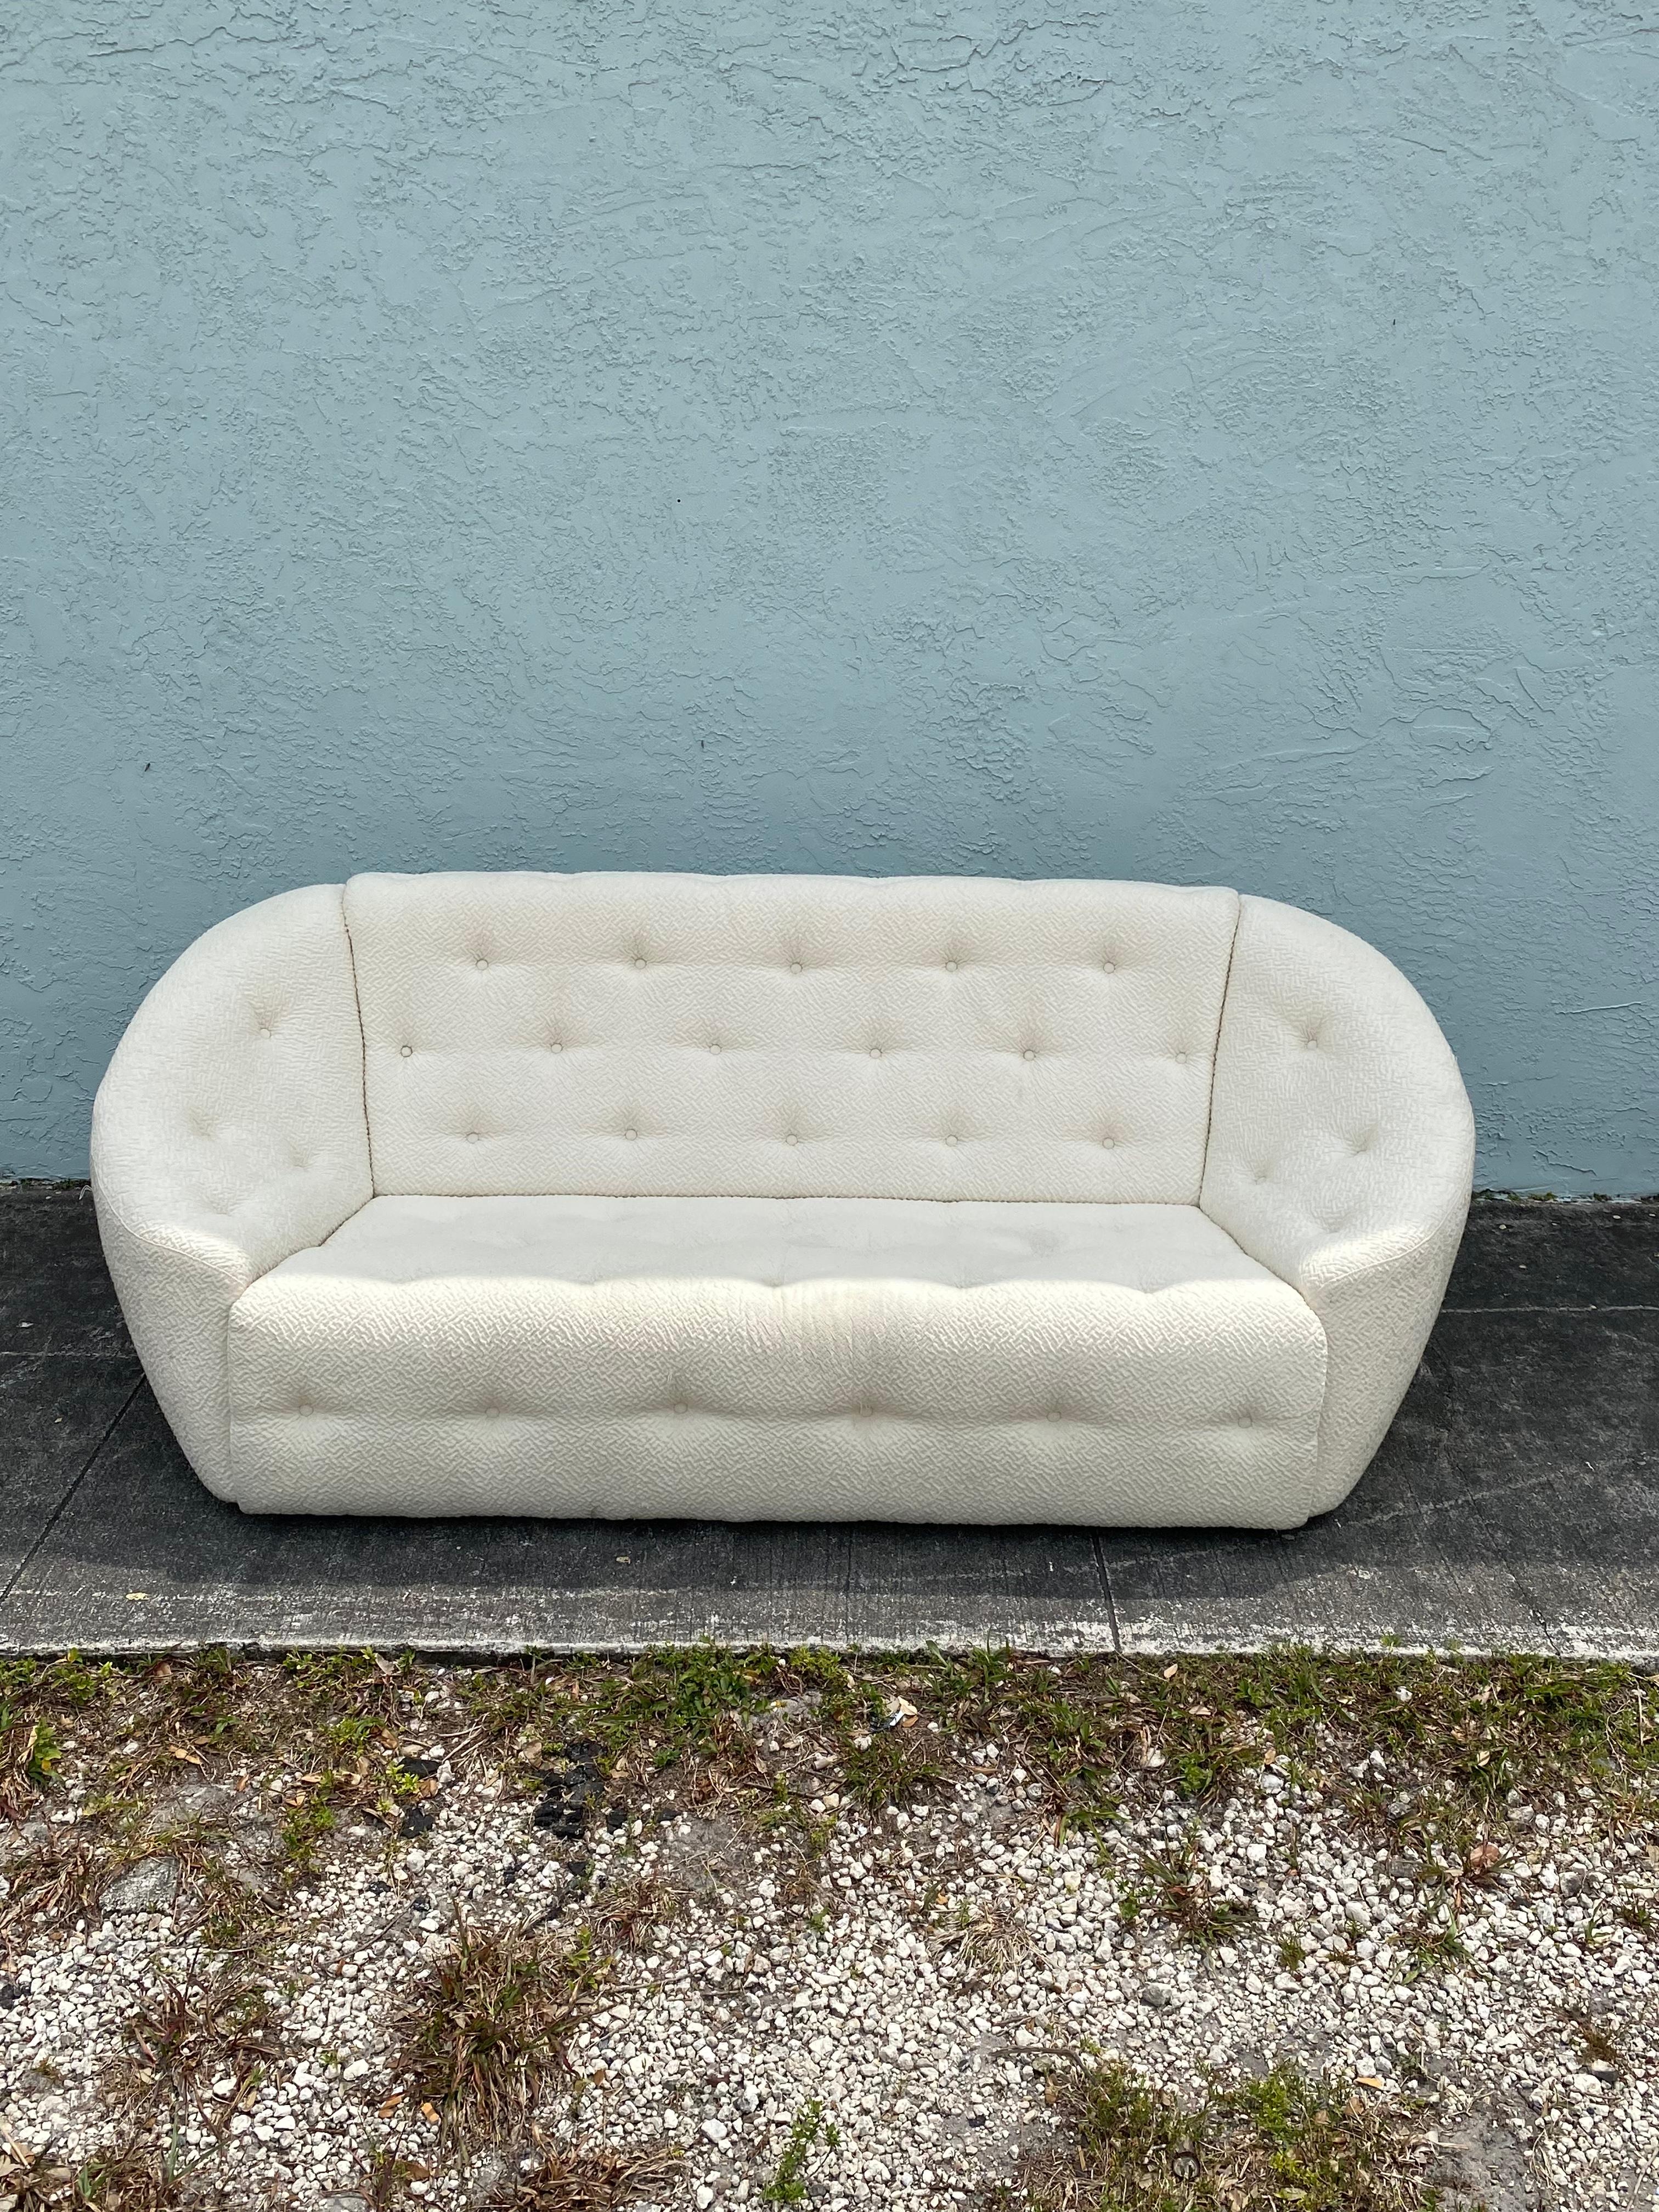 On offer on this occasion is one of the most stunning and rare, sculptural curved sofa you could hope to find. Outstanding design is exhibited throughout. The beautiful sofa is statement piece which is also extremely comfortable and packed with